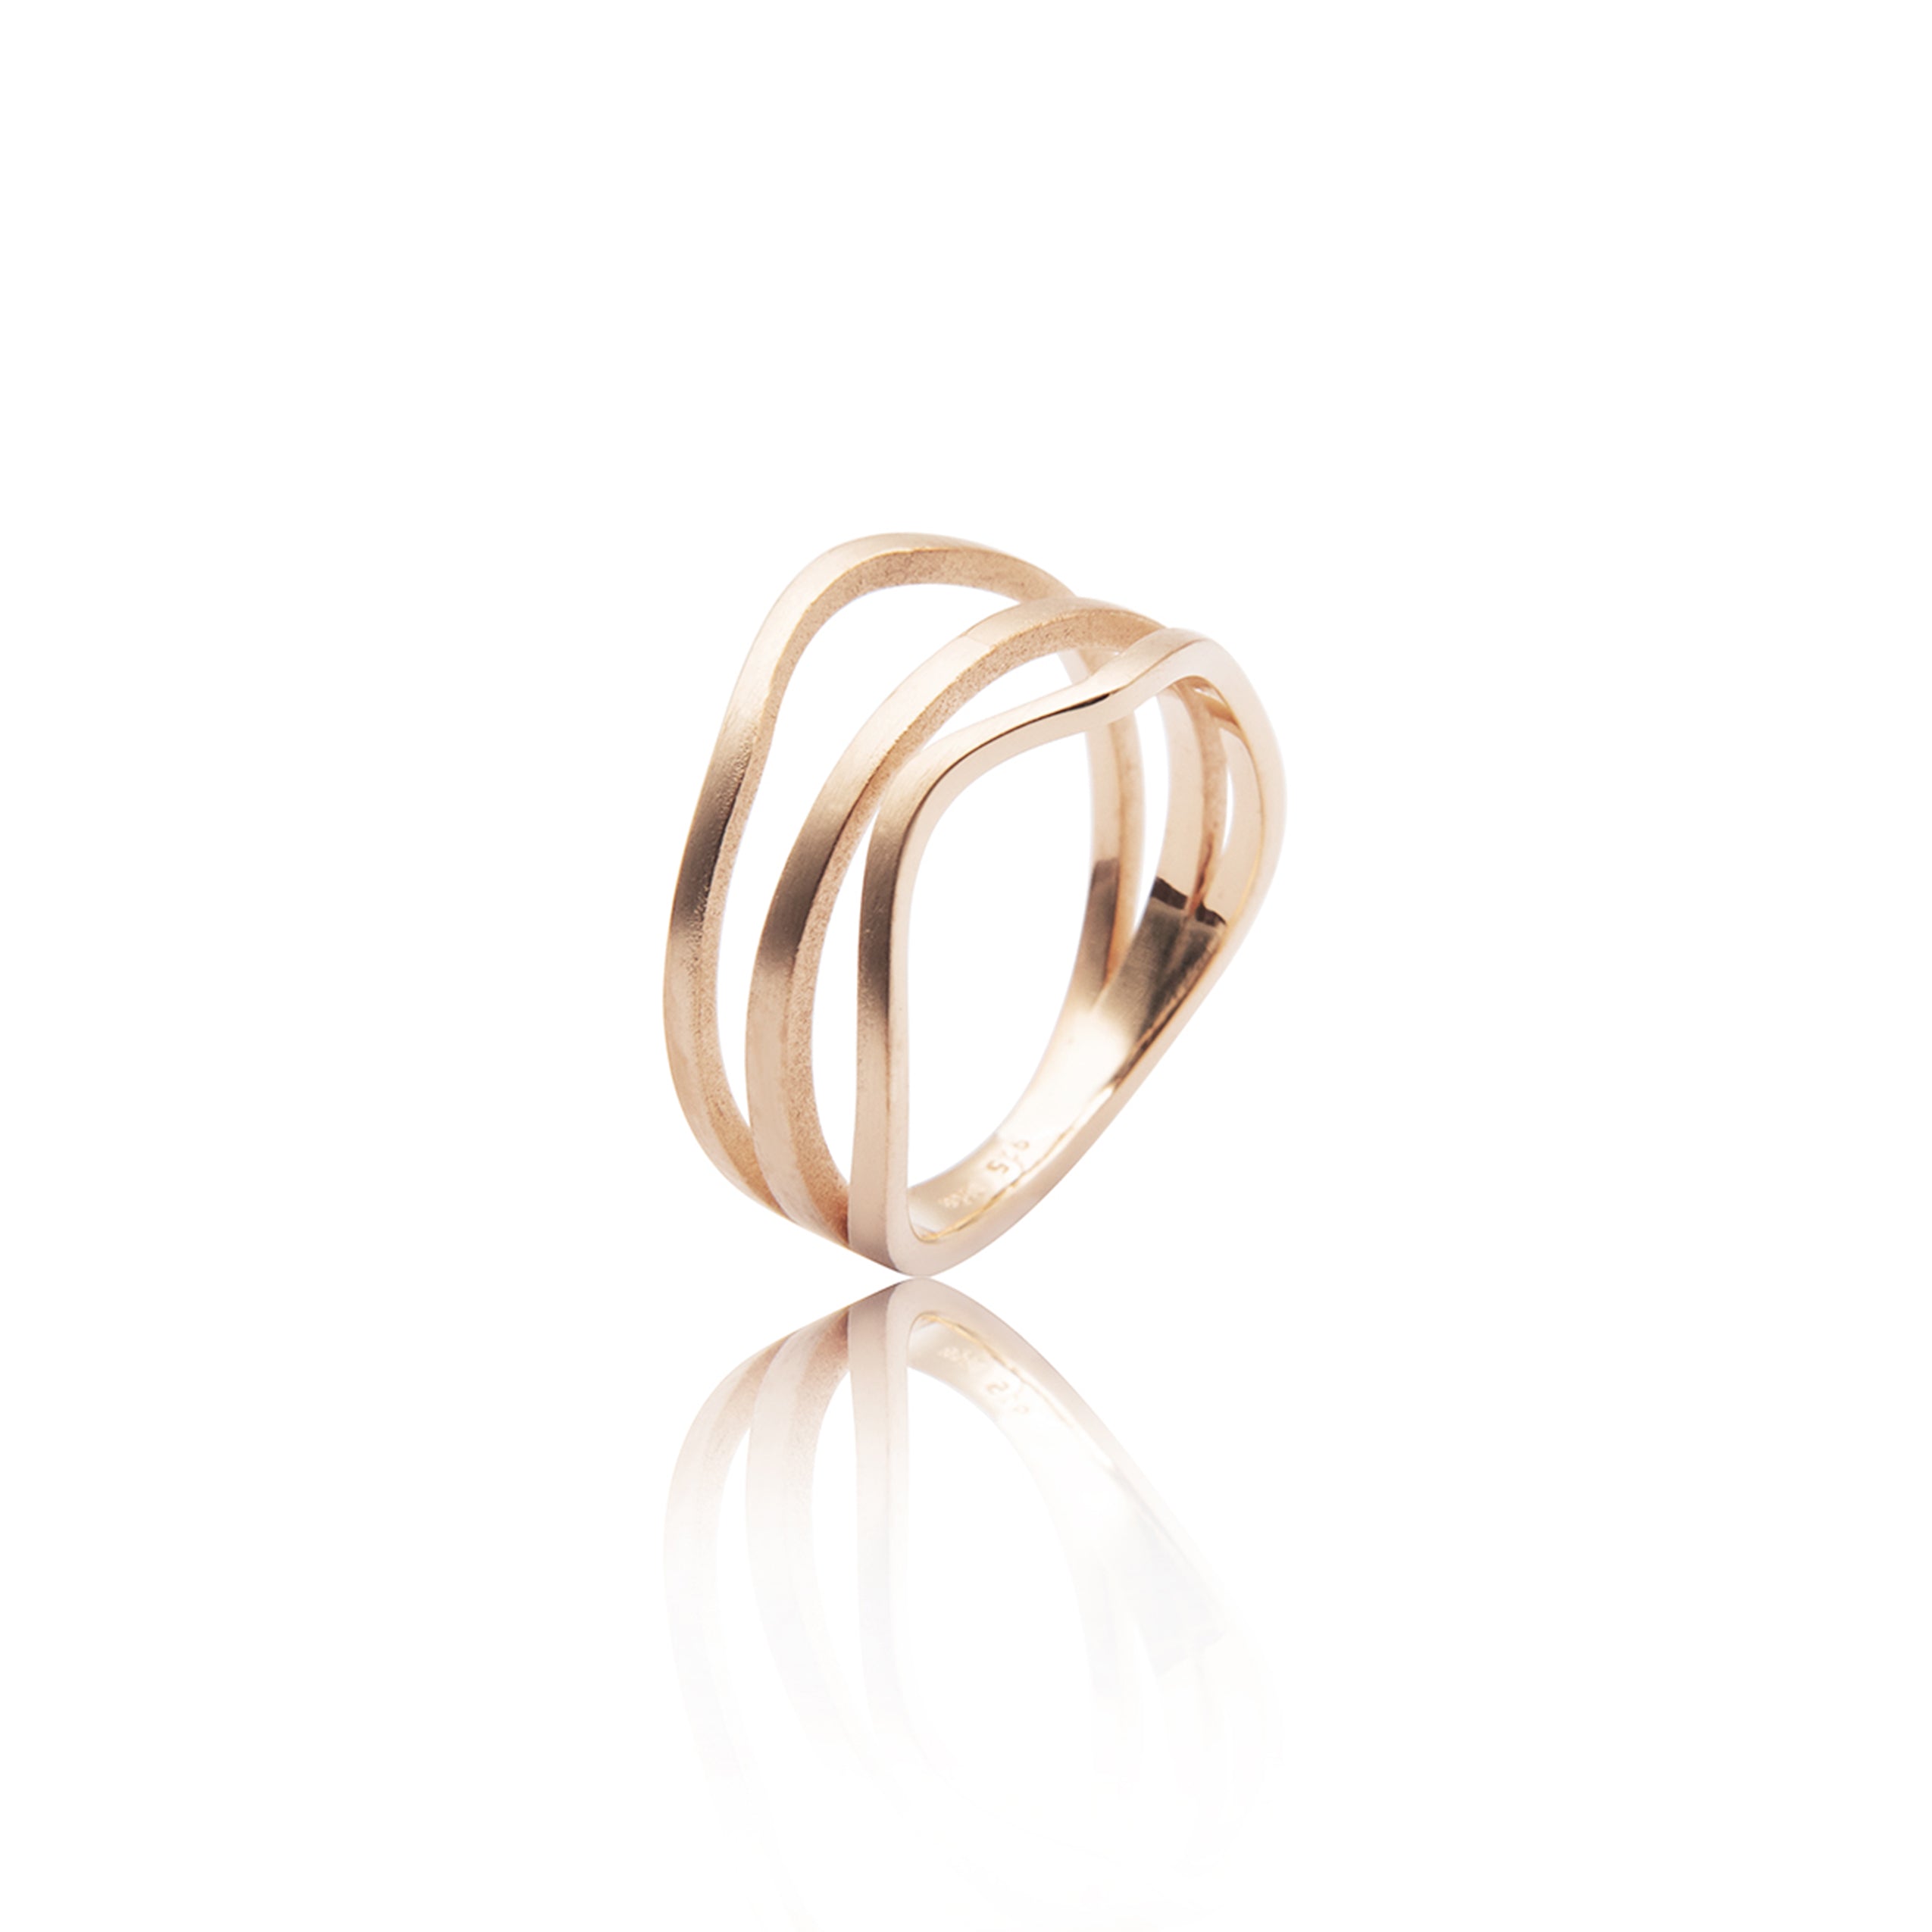 Cascade ring "3" in 585 gold